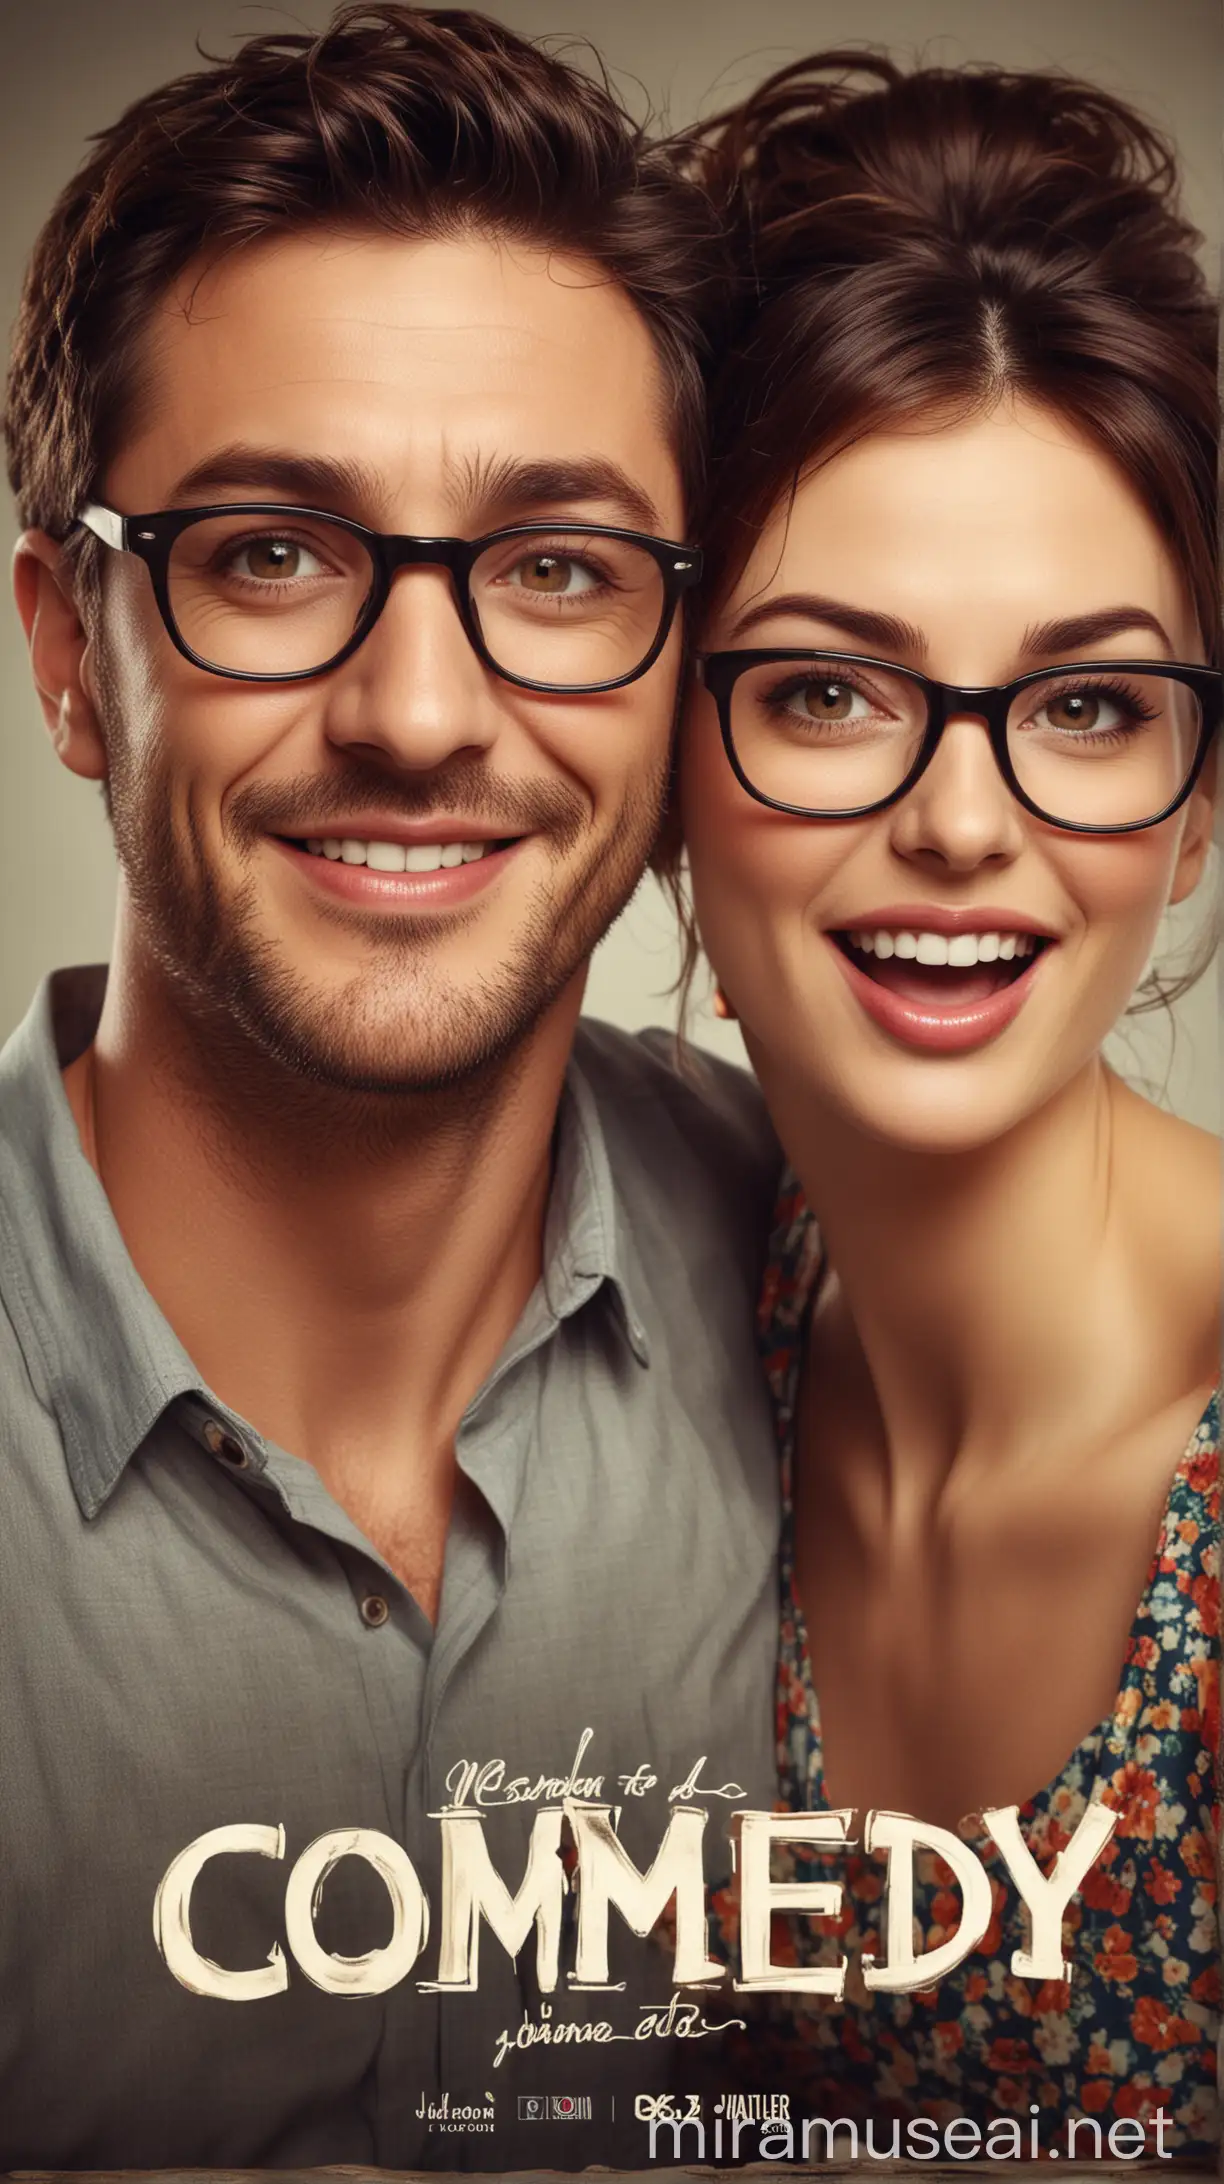 Casual Dress Sensual Woman with Glasses and Handsome Man for Comedy Movie Banner